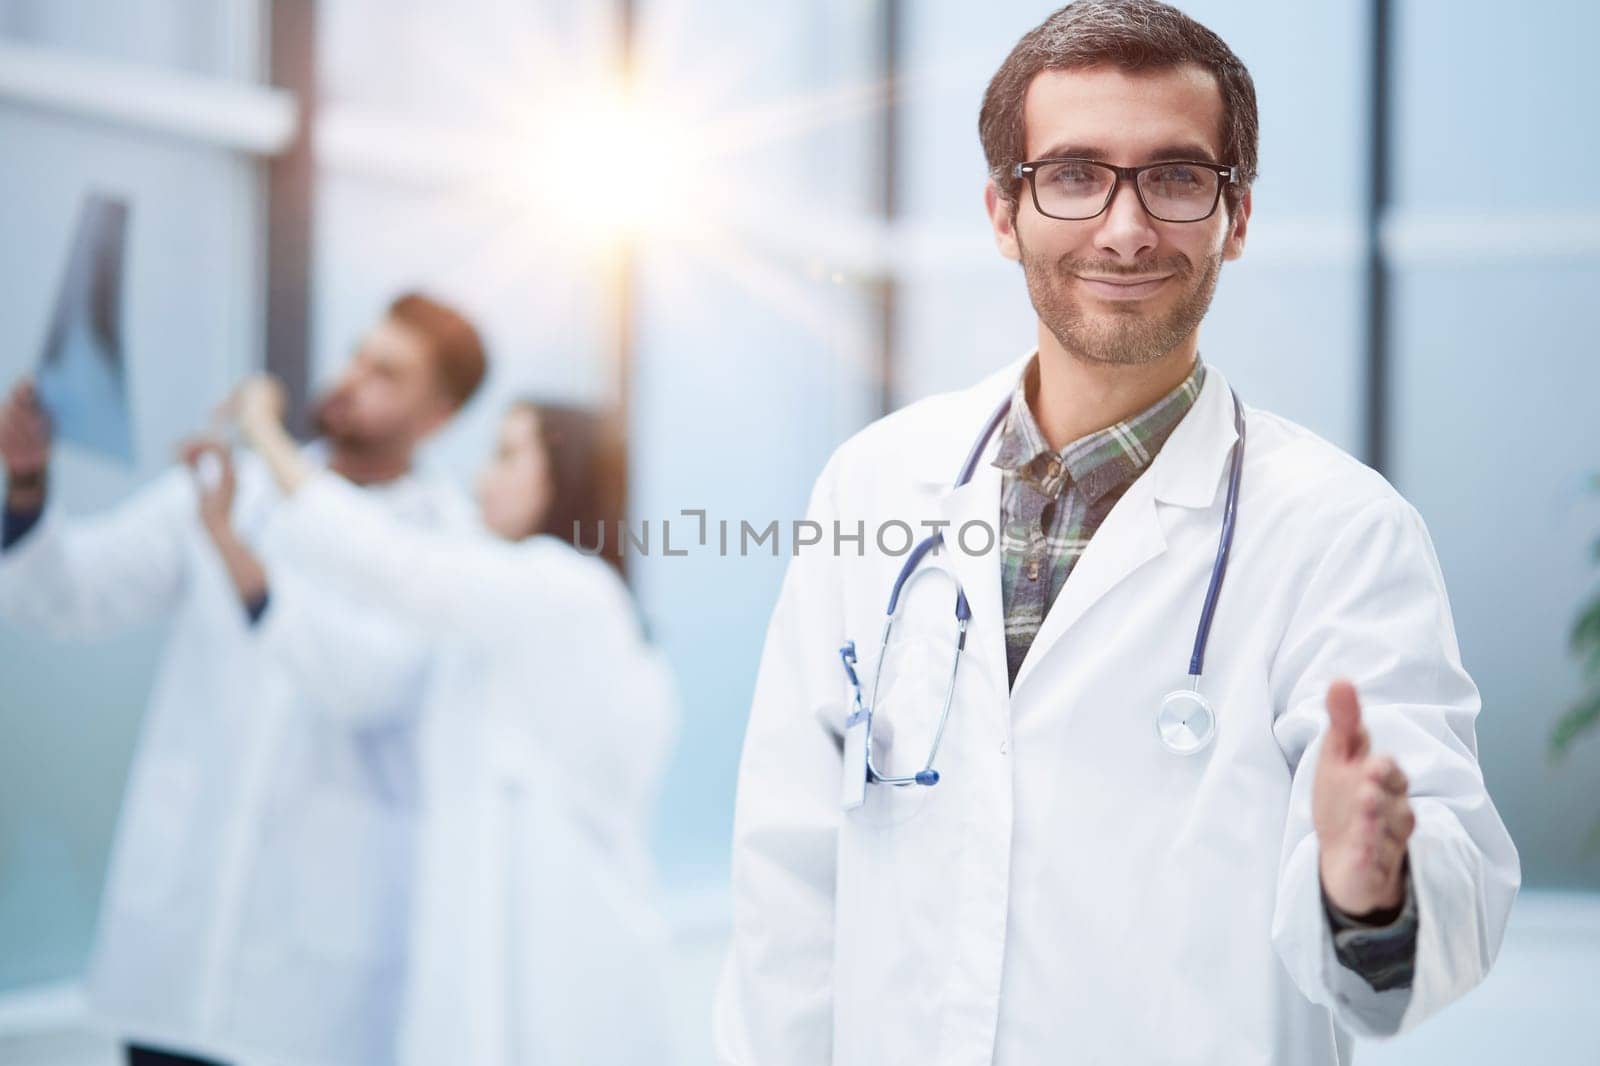 image of a doctor extending his hand in greeting against the background of his colleagues